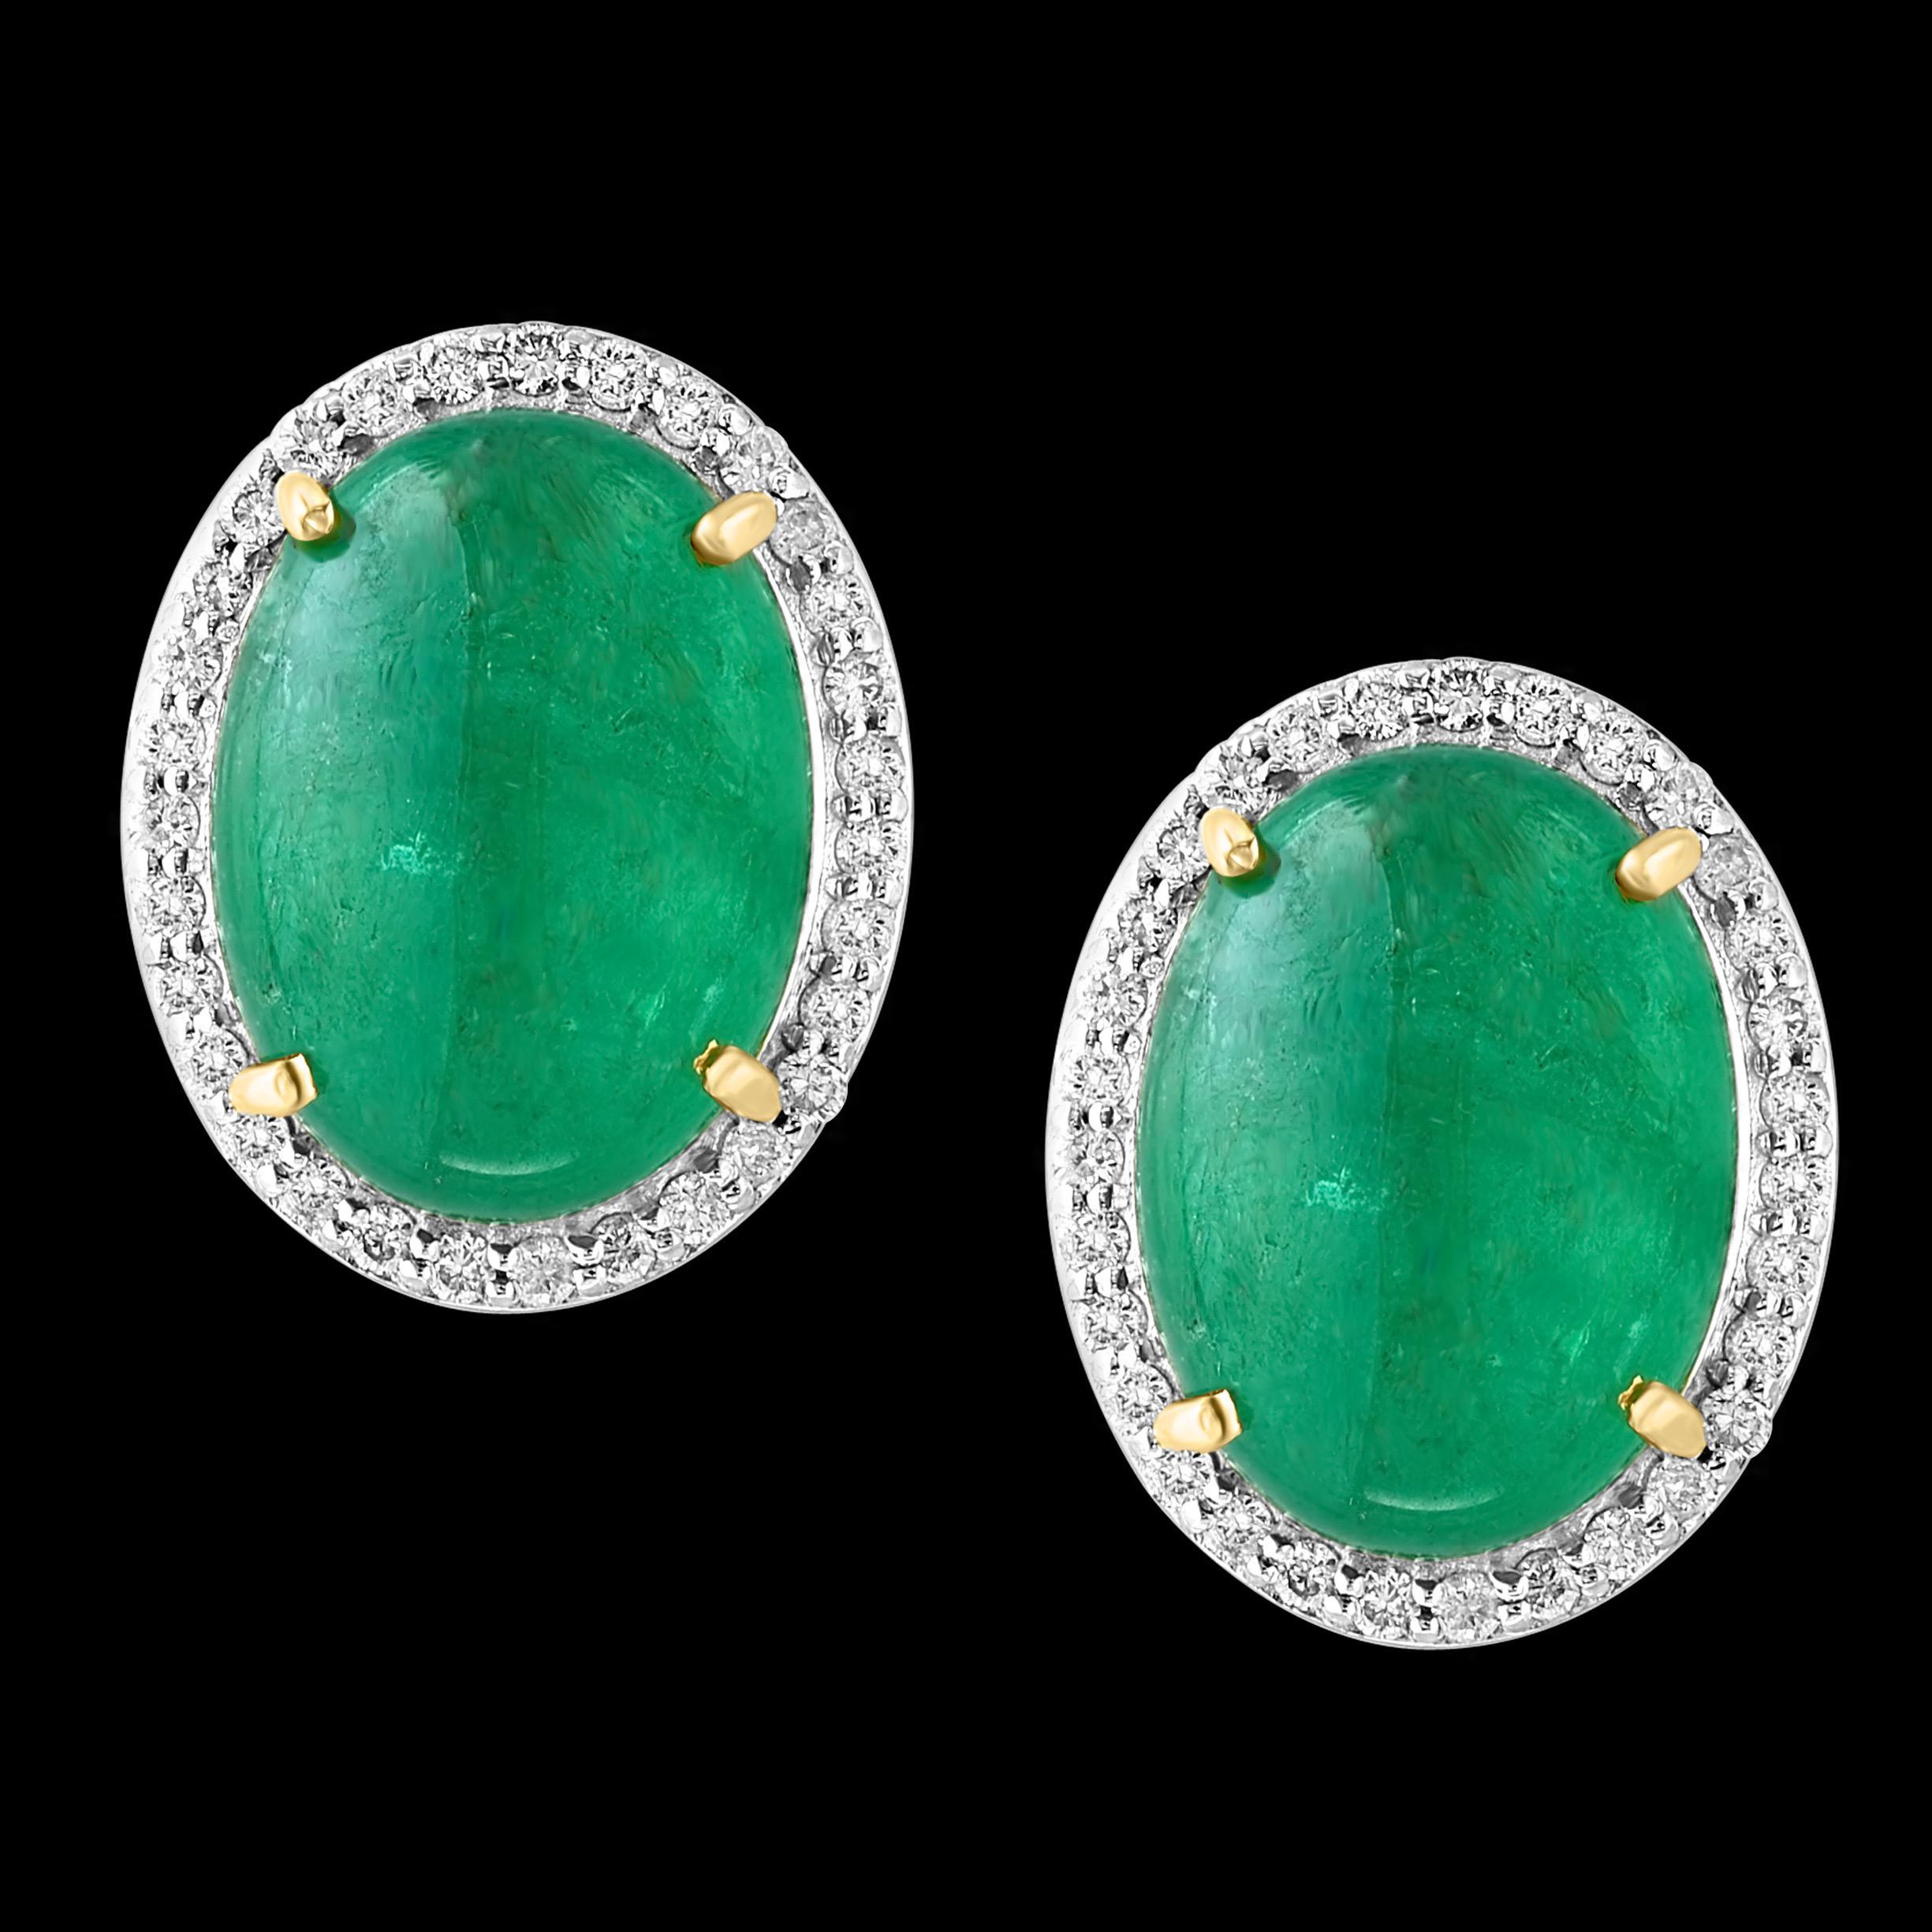 110 Ct Oval Natural Cabochon Emerald & Diamond Necklace, Earring Suite 14 K Gold For Sale 4